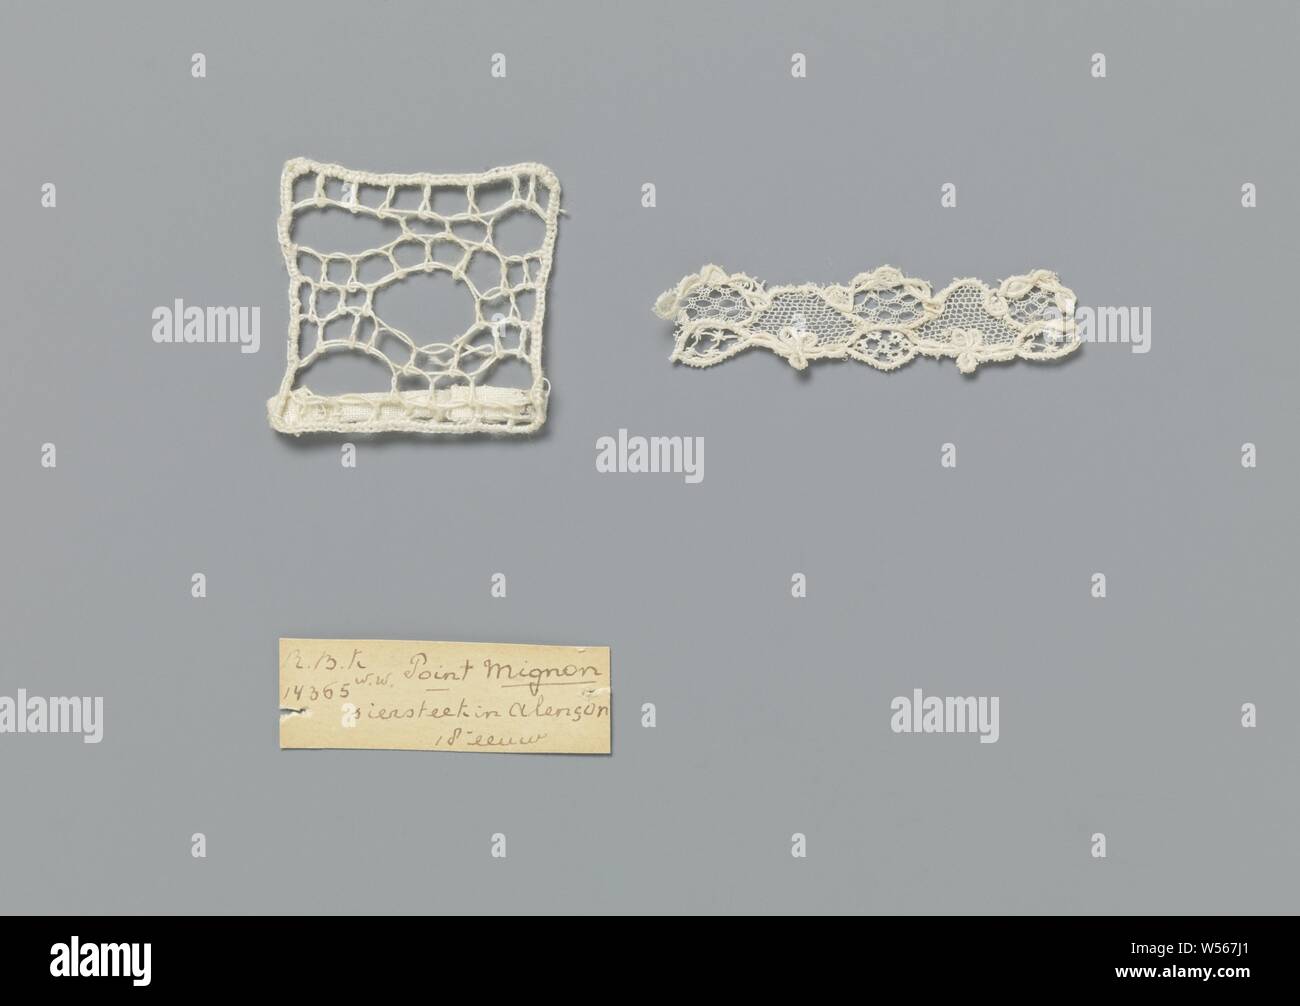 Steel needle lace with a decorative ground made in fine diamond stitch, Steel natural colored needle lace with a decorative ground that is used in, among other things, Alençon lace. Study material. The needle lace stitch used in the decorative soil is also called 'point de Mignon', a fine diamond stitch. The edges of the steel are finished with festival stitches. The sample that was made as a study around 1925 is accompanied by a fragment of Alençon lace from the 18th century in which this diamond stitch was used in the decorative soil., anonymous, Netherlands (possibly), c. 1925 - c. 1929 Stock Photo